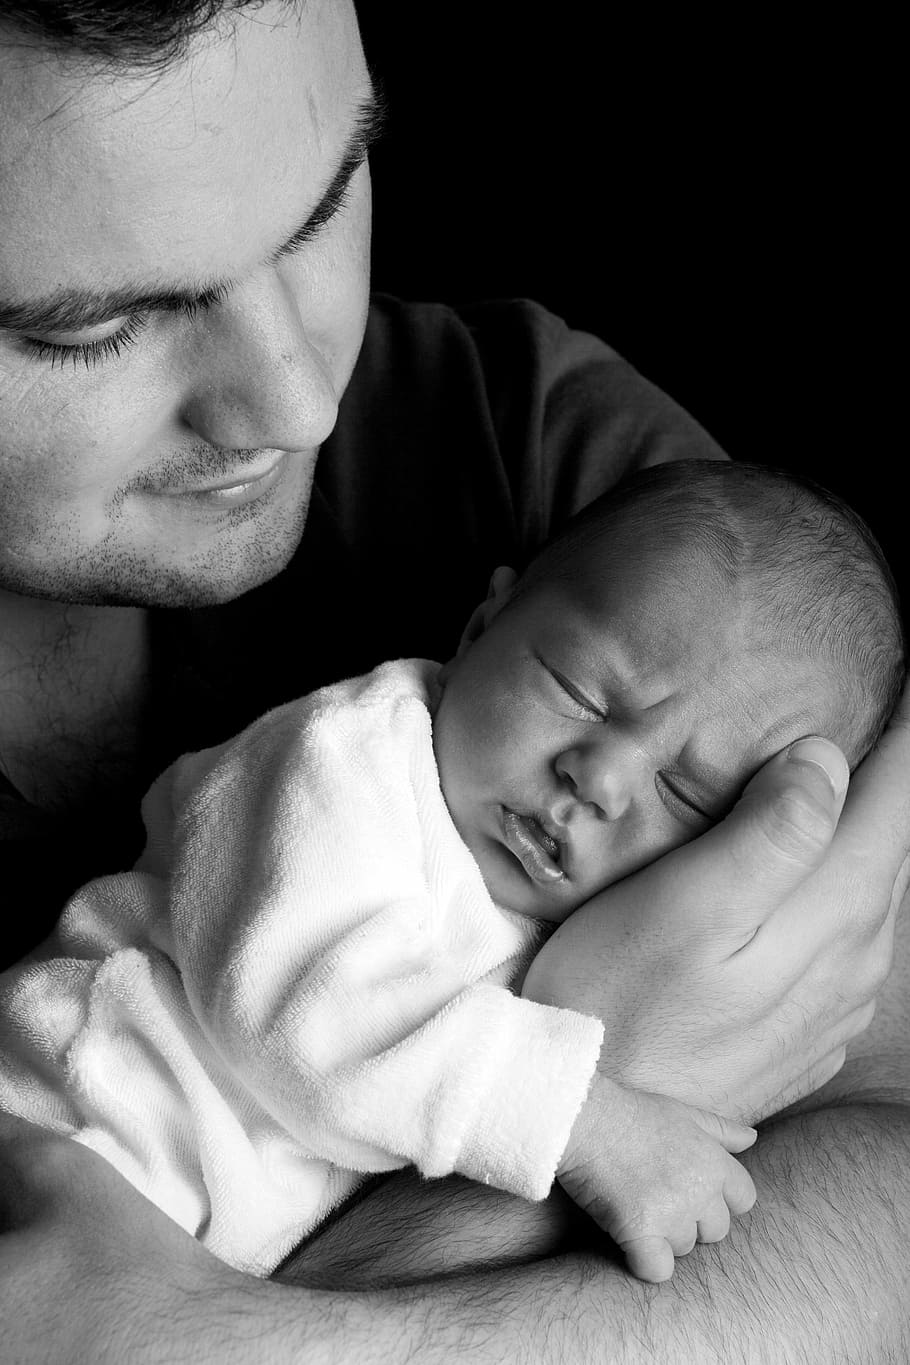 man, carrying, newborn, grayscale photo, baby, care, child, cute, dad, face